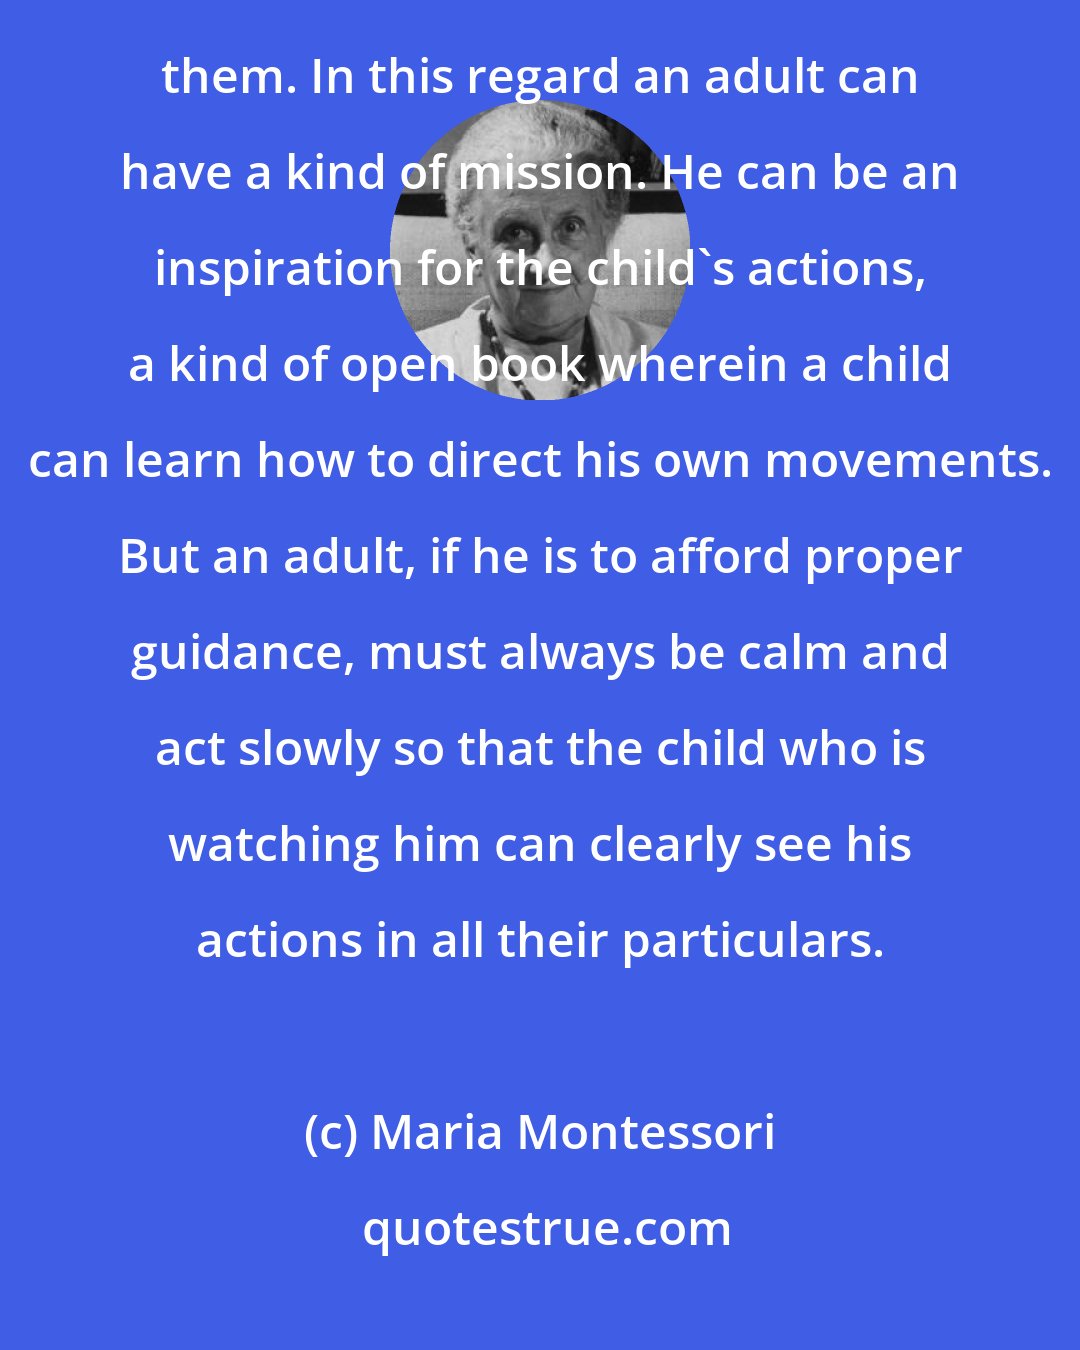 Maria Montessori: A child is an eager observer and is particularly attracted by the actions of the adults and wants to imitate them. In this regard an adult can have a kind of mission. He can be an inspiration for the child's actions, a kind of open book wherein a child can learn how to direct his own movements. But an adult, if he is to afford proper guidance, must always be calm and act slowly so that the child who is watching him can clearly see his actions in all their particulars.